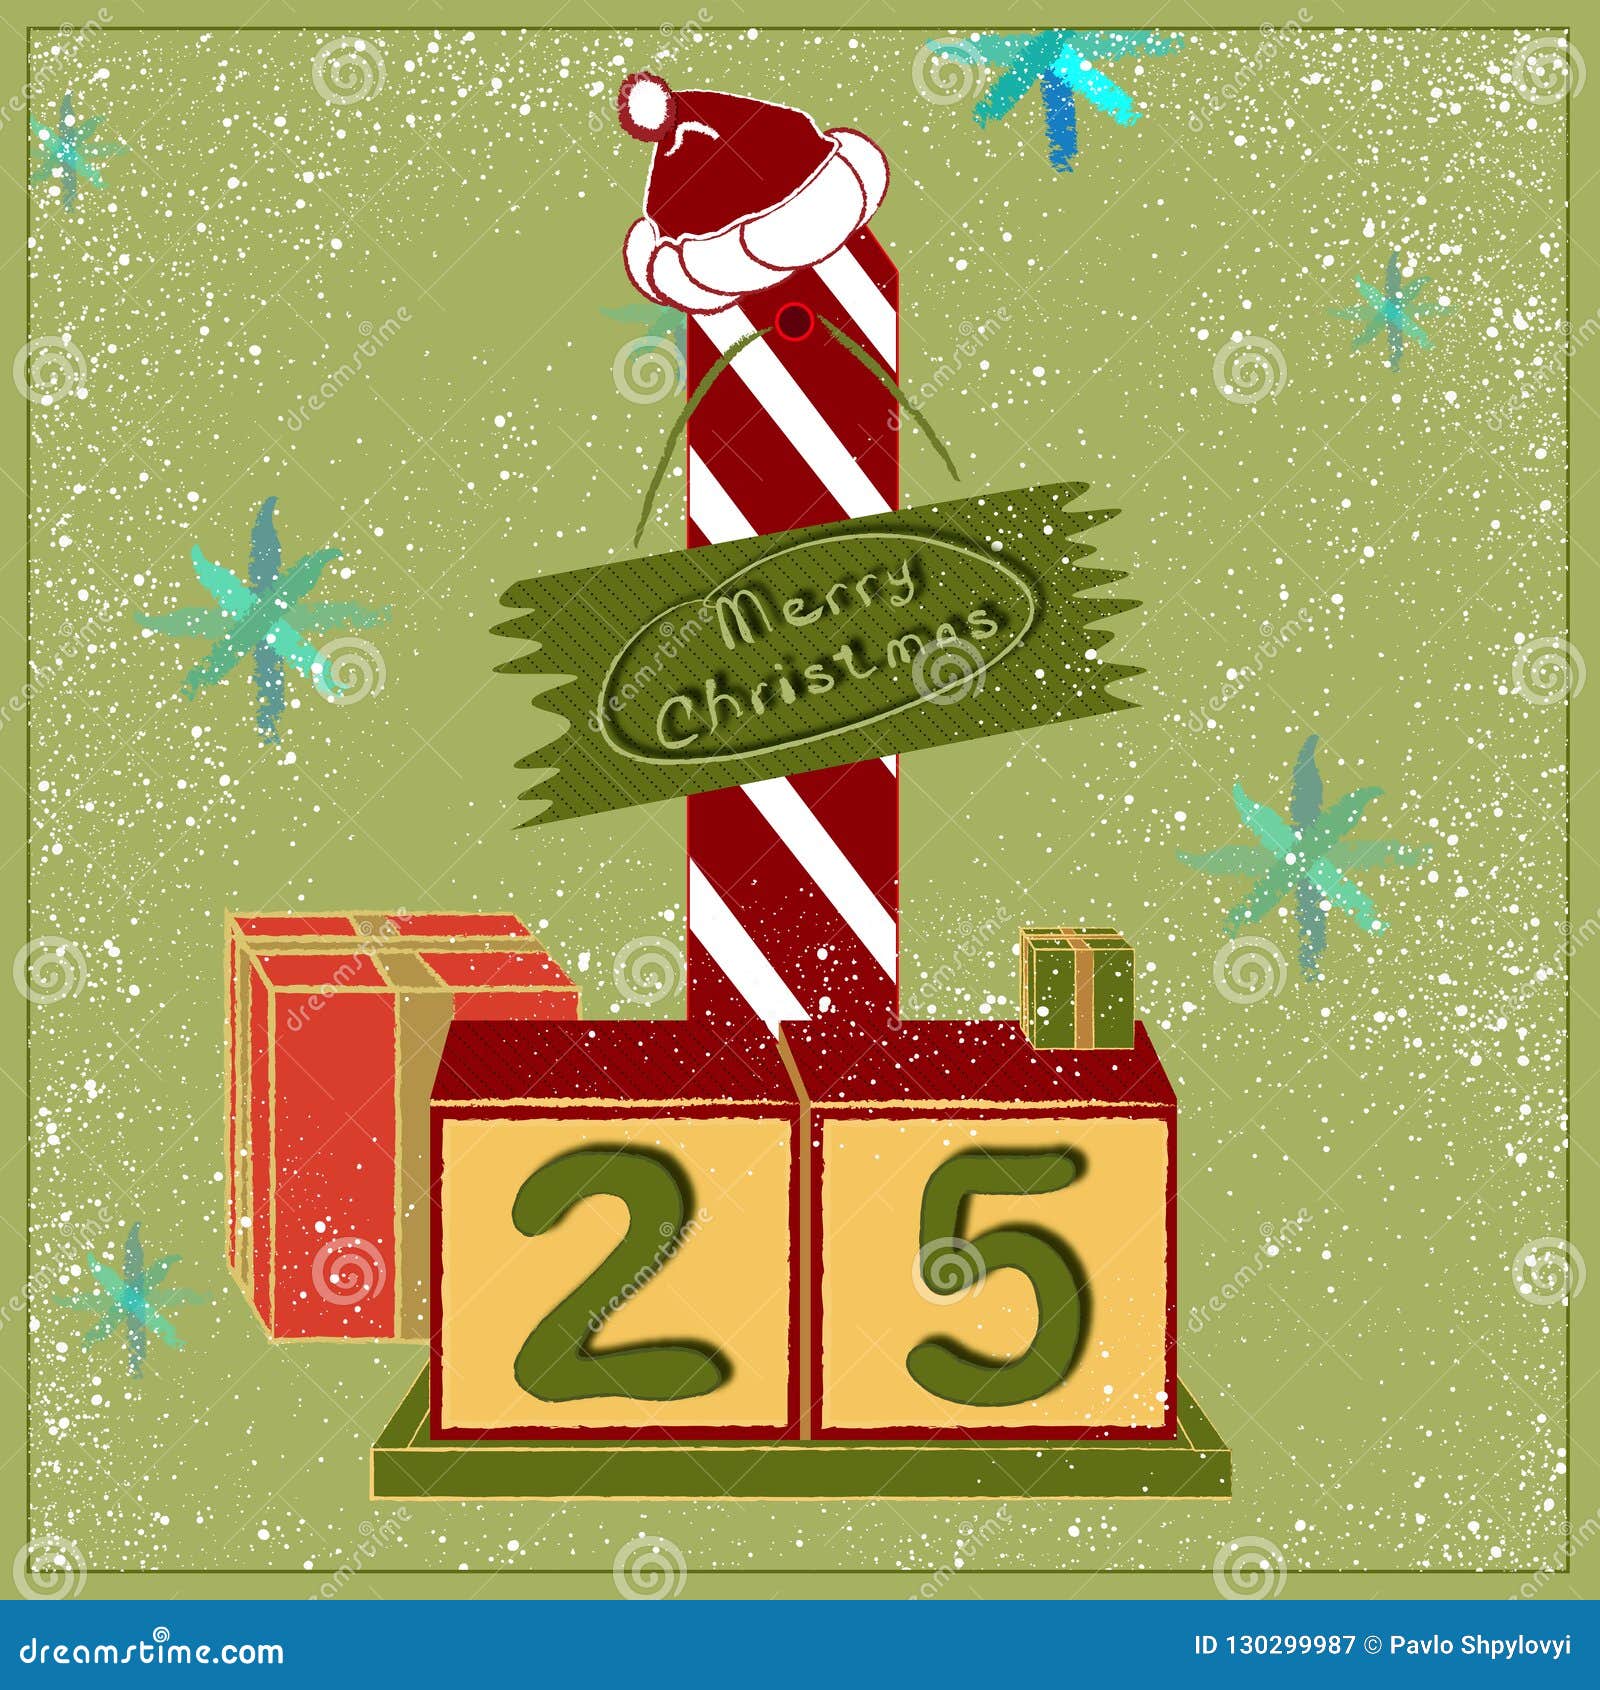 Merry Christmas Calendar with Presents Stock Vector Illustration of